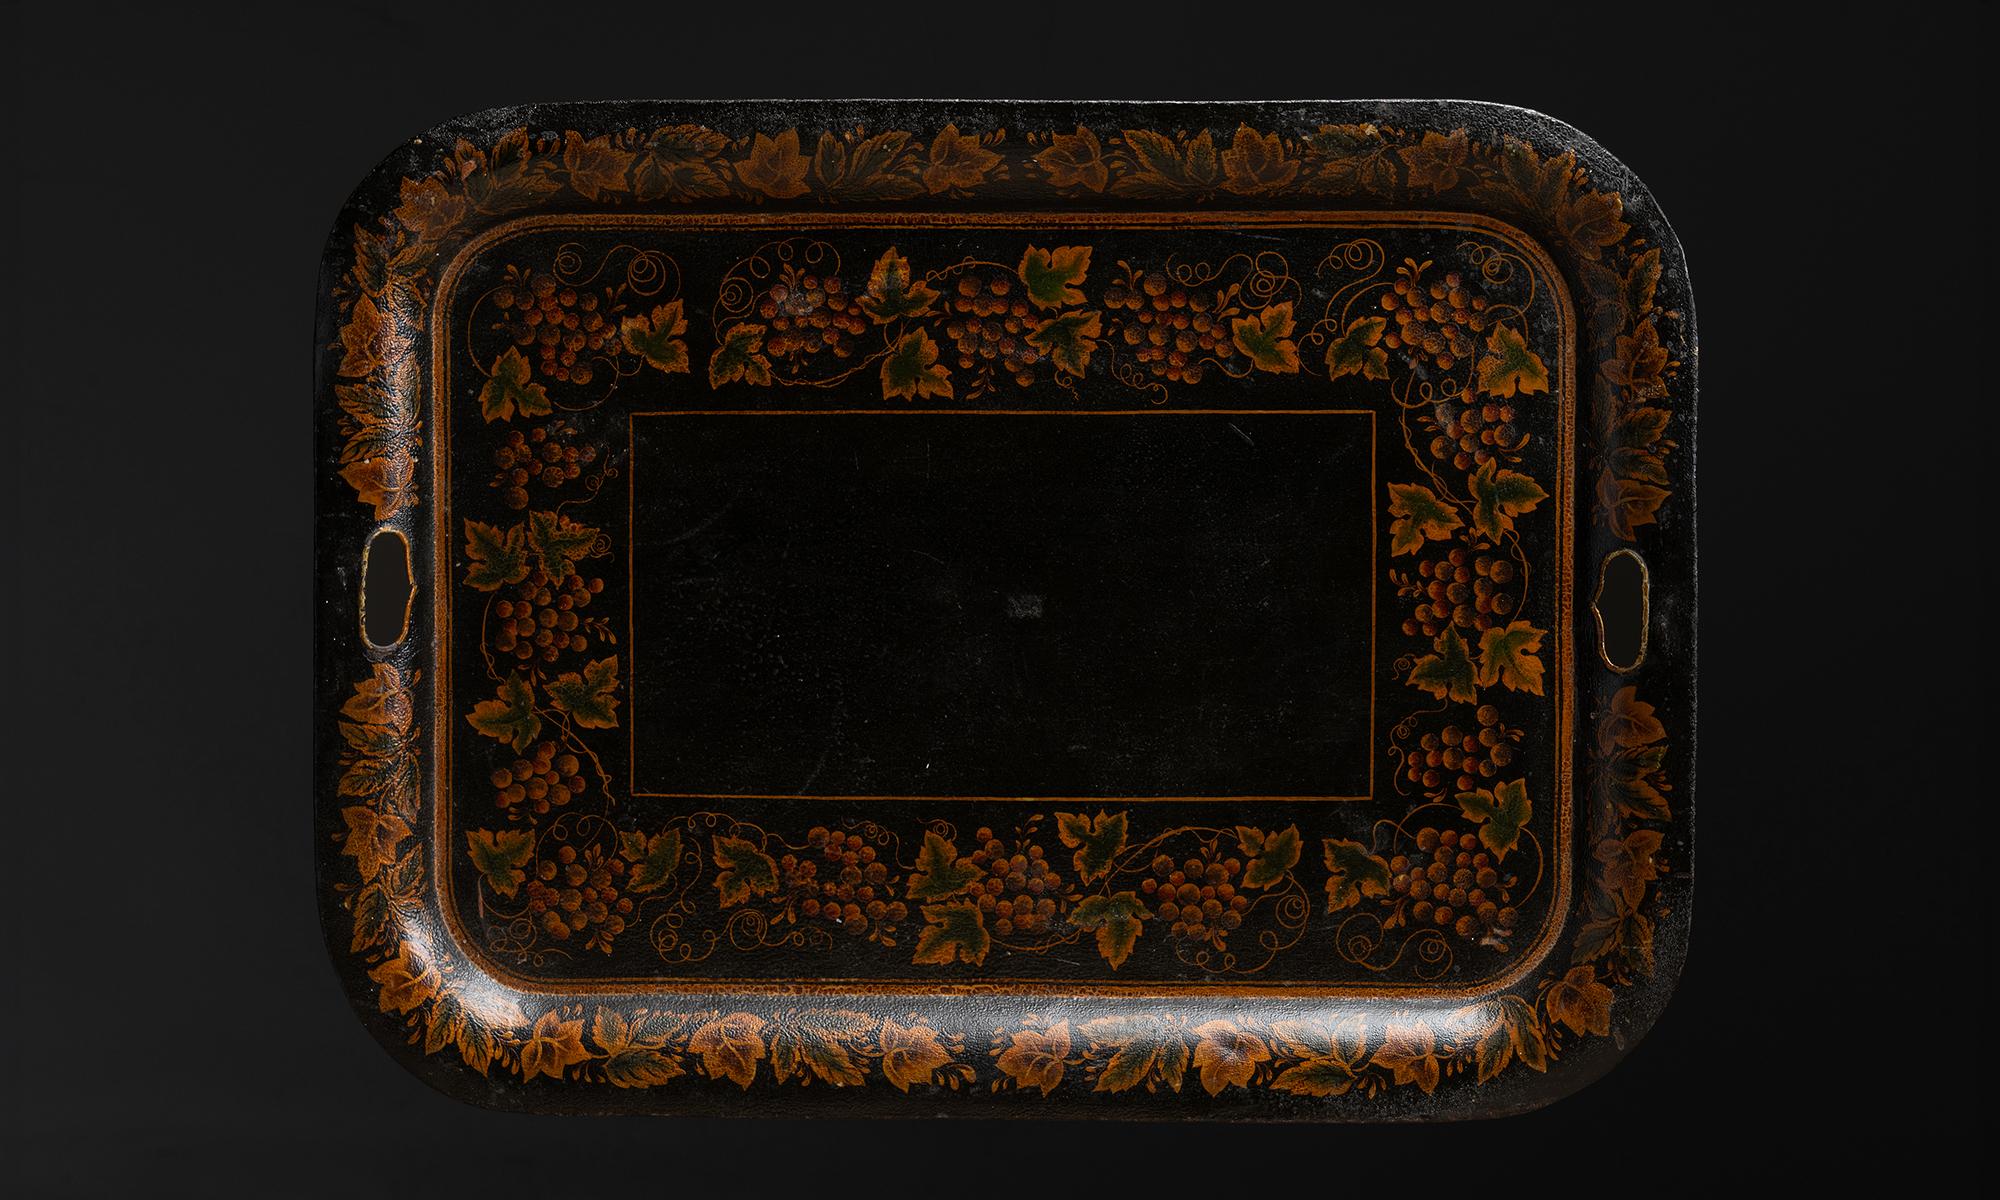 Toleware Tray

England circa 1890

Hand painted design of foliage and grapes, with distressed surface.

28.25”L x 21”d x 1”h